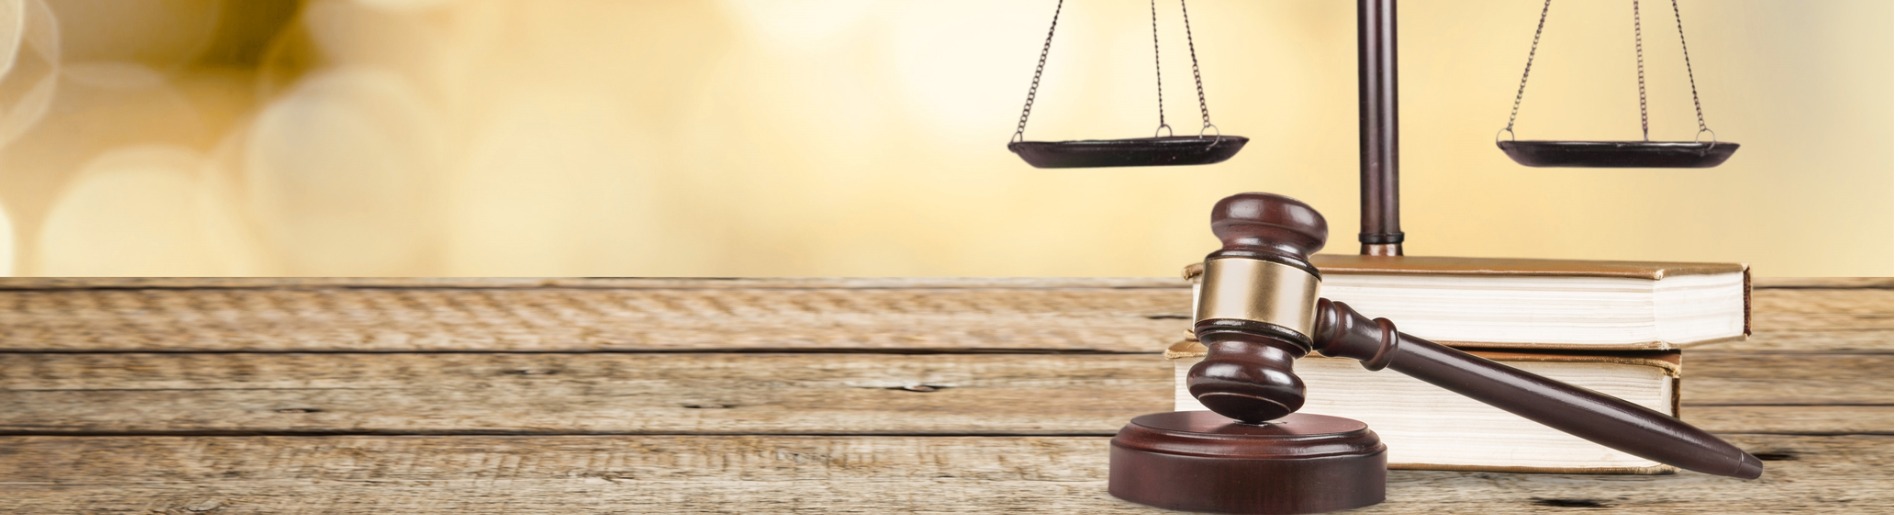 Scales of justice and judges gavel 